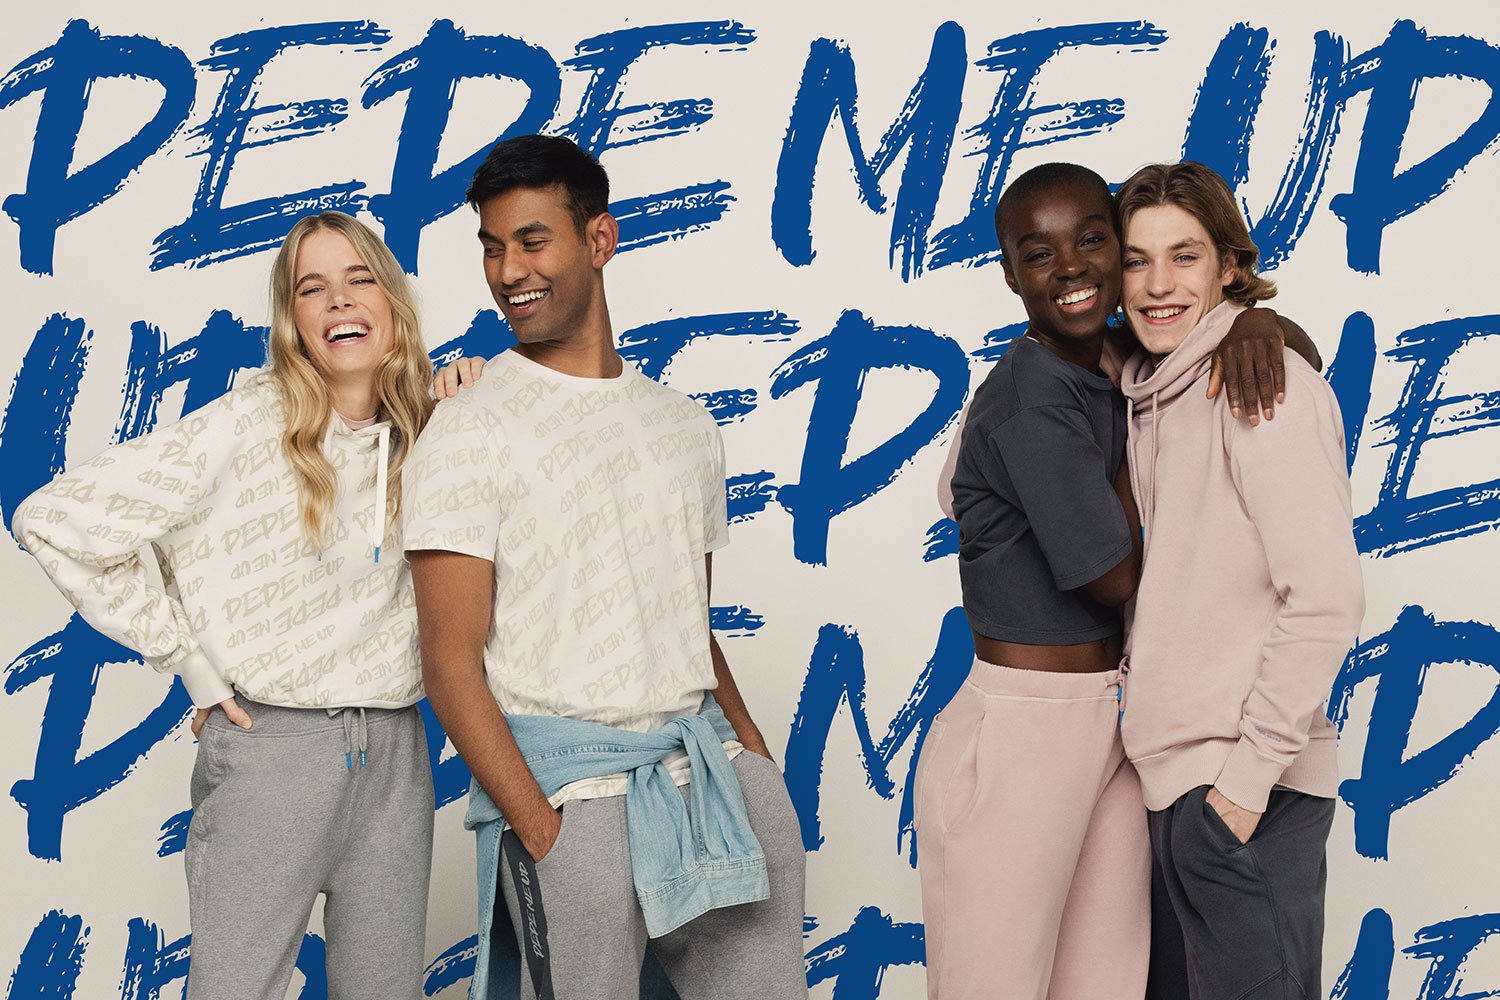 pepe jeans discount sale